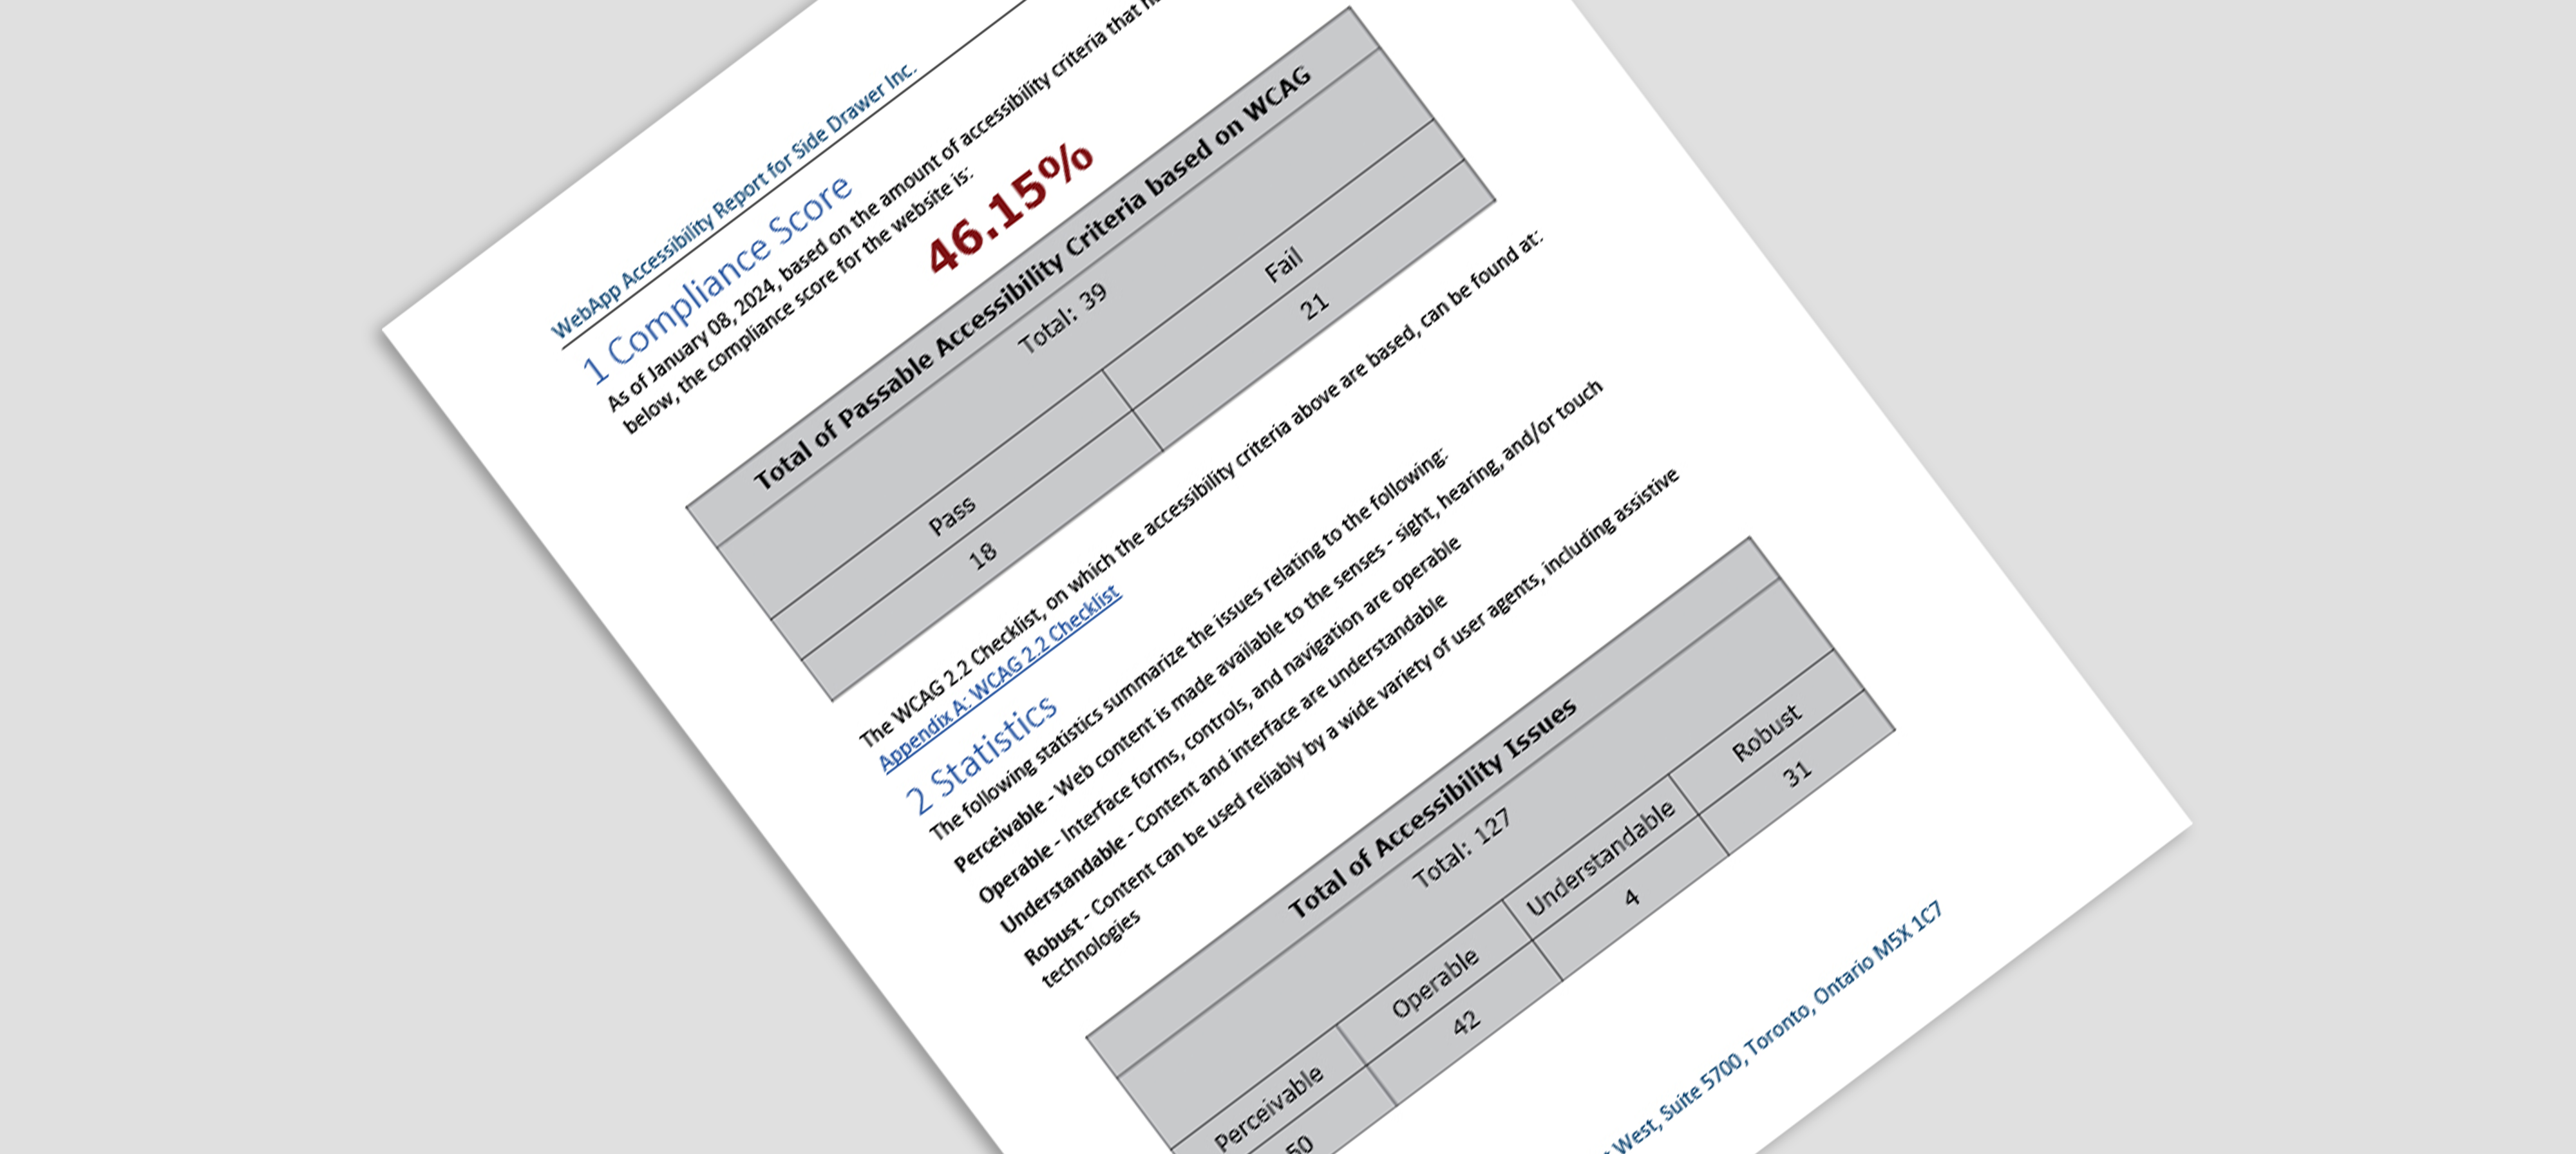 A Web Accessibility Report page showing the compliance score and issue summary statistics